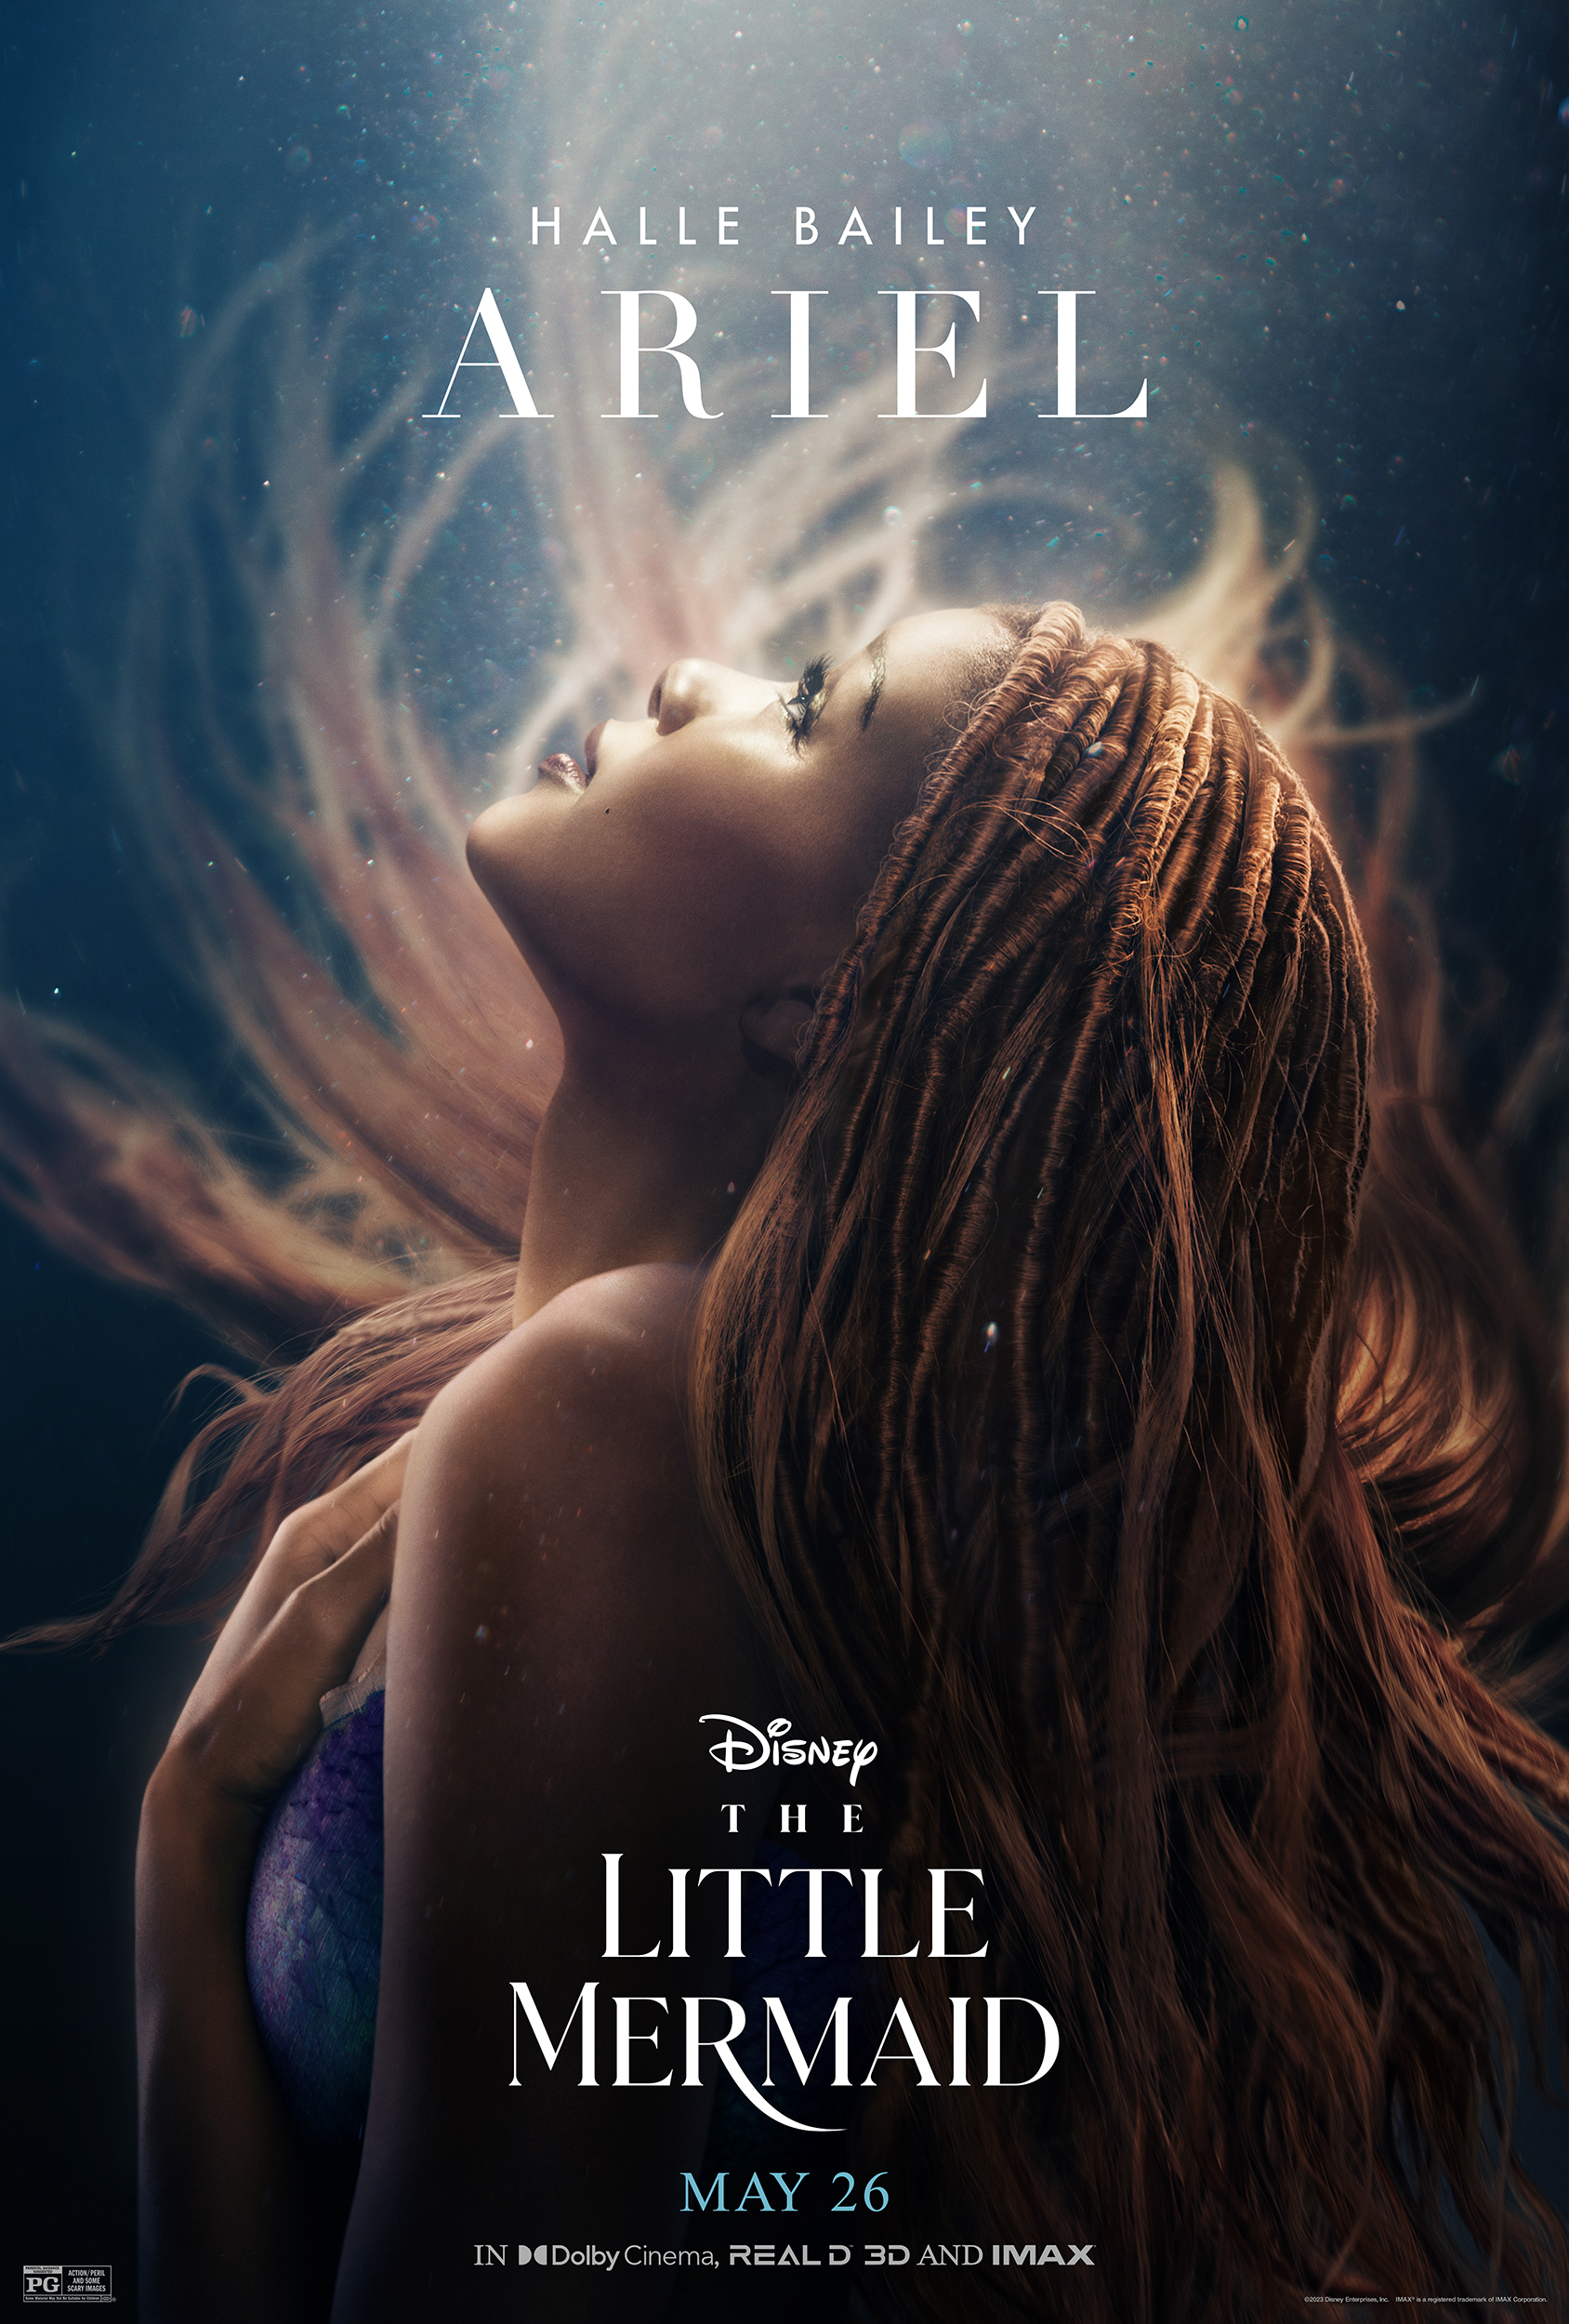 Tickets For “The Little Mermaid” Go On Sale Today